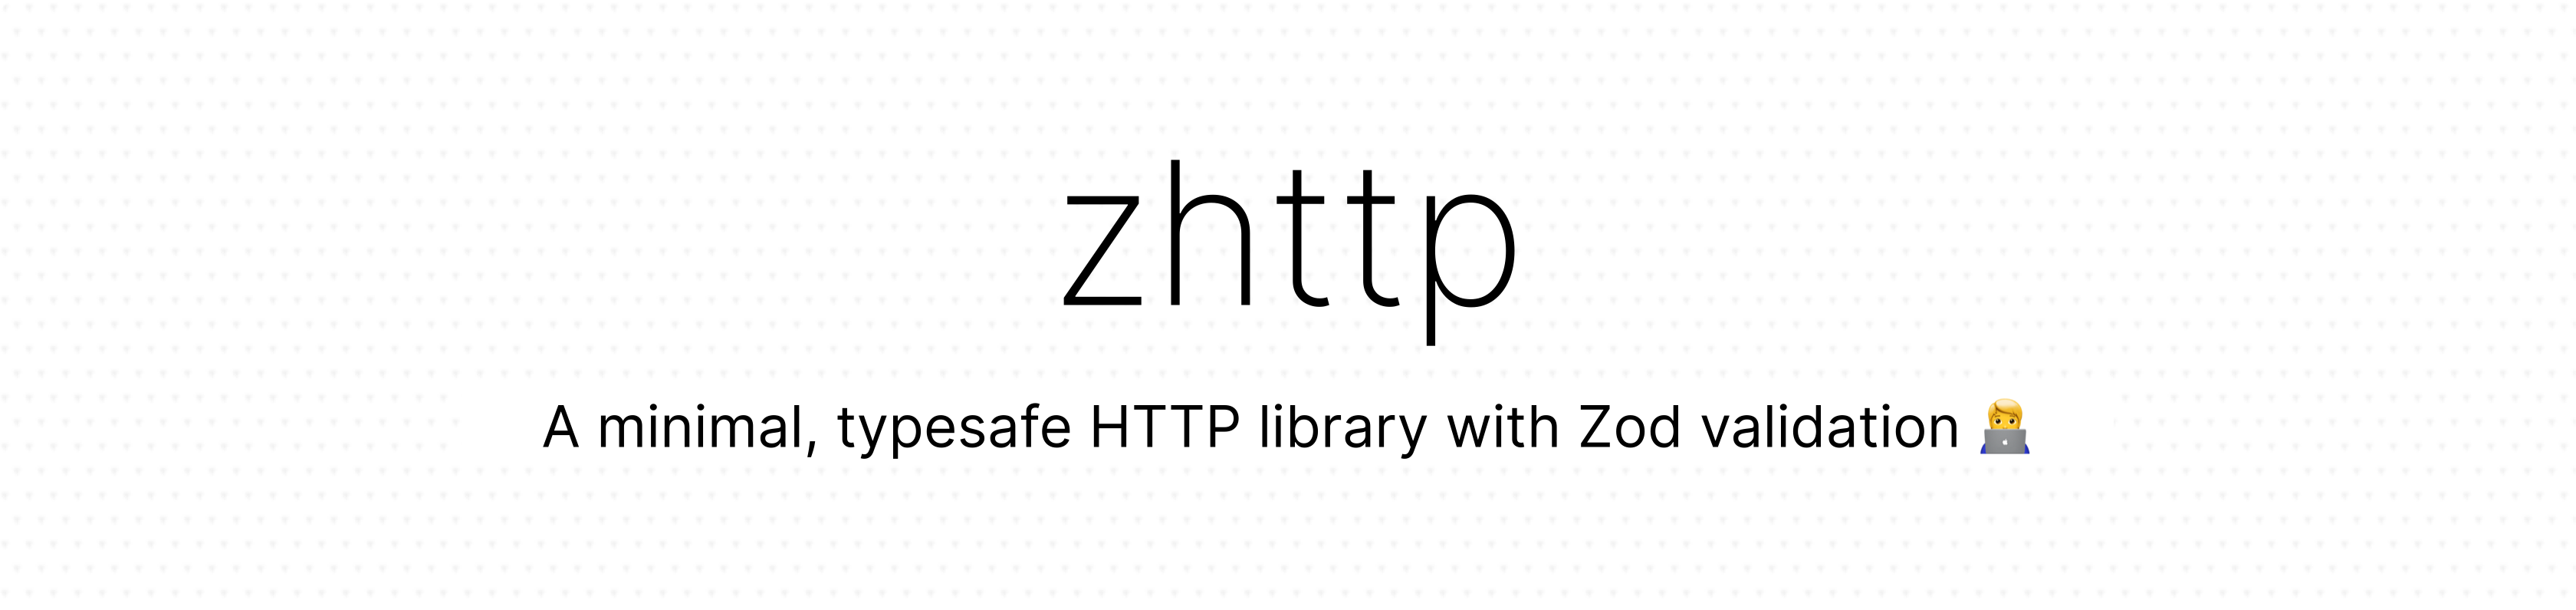 zhttp, a minimal, typesafe HTTP library with Zod validation